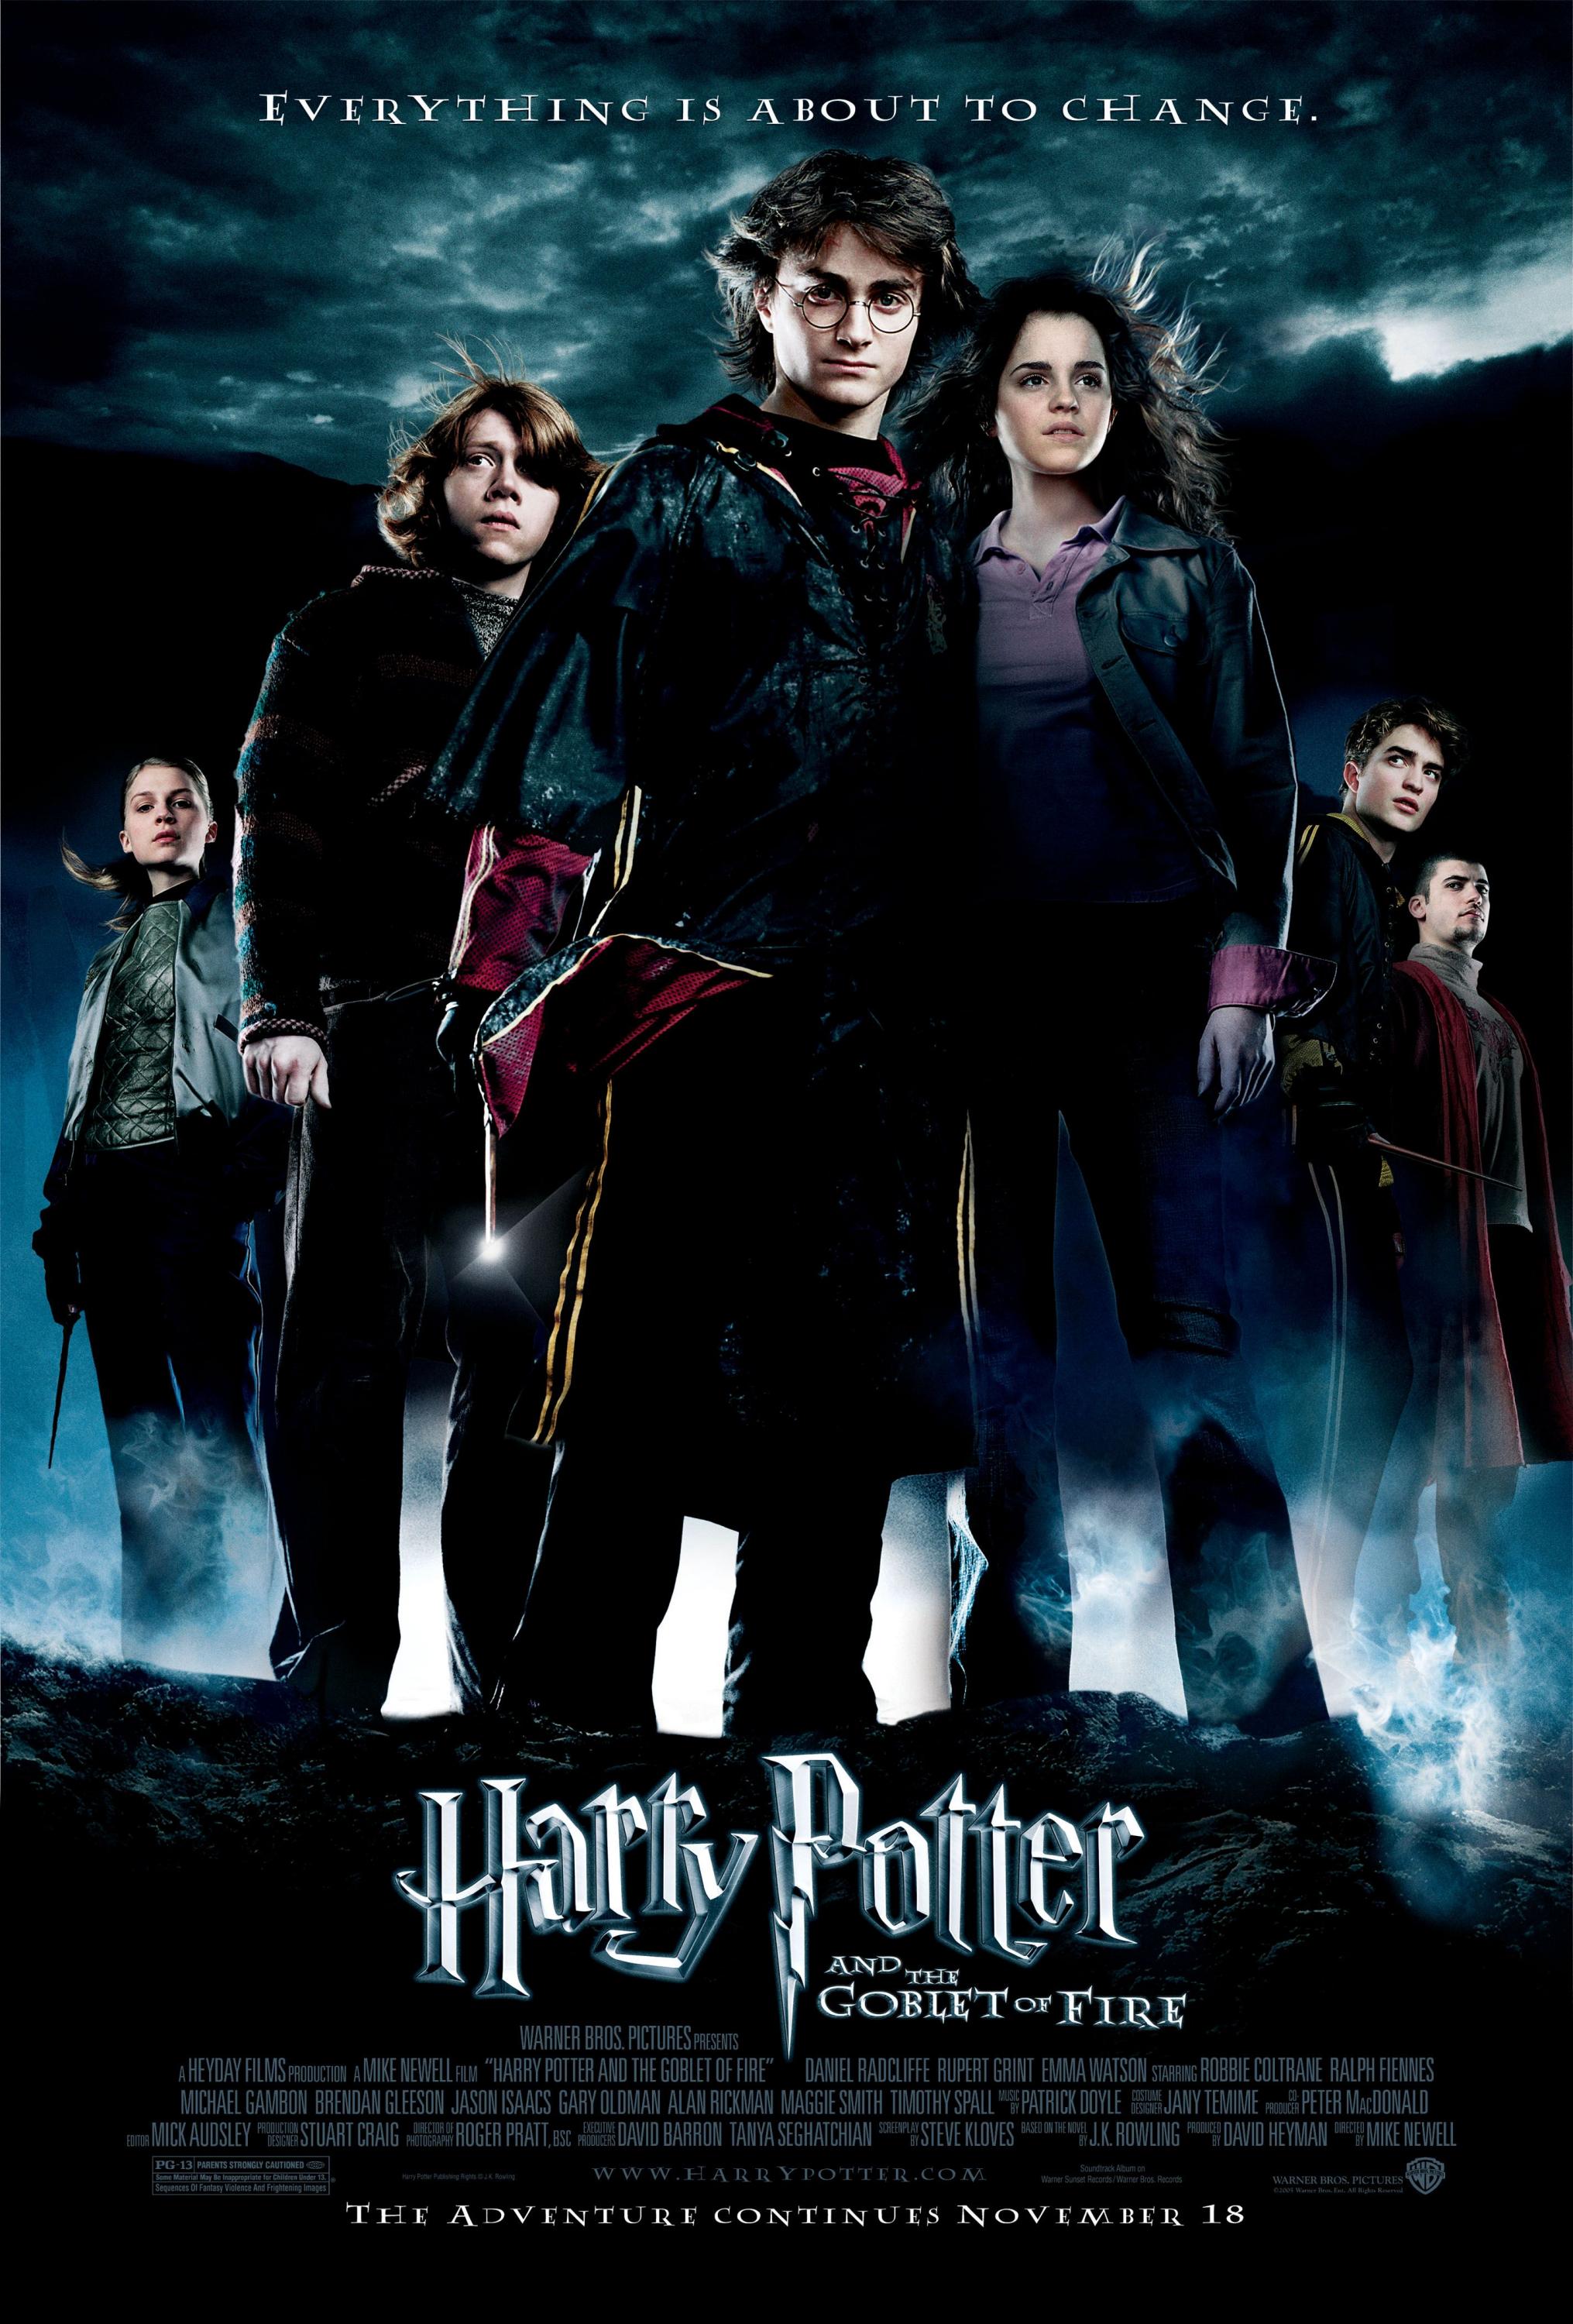 https://irs.www.warnerbros.com/gallery-v2-jpeg/harry_potter_and_the_goblet_of_fire_posterlarge_1-706532860.jpg